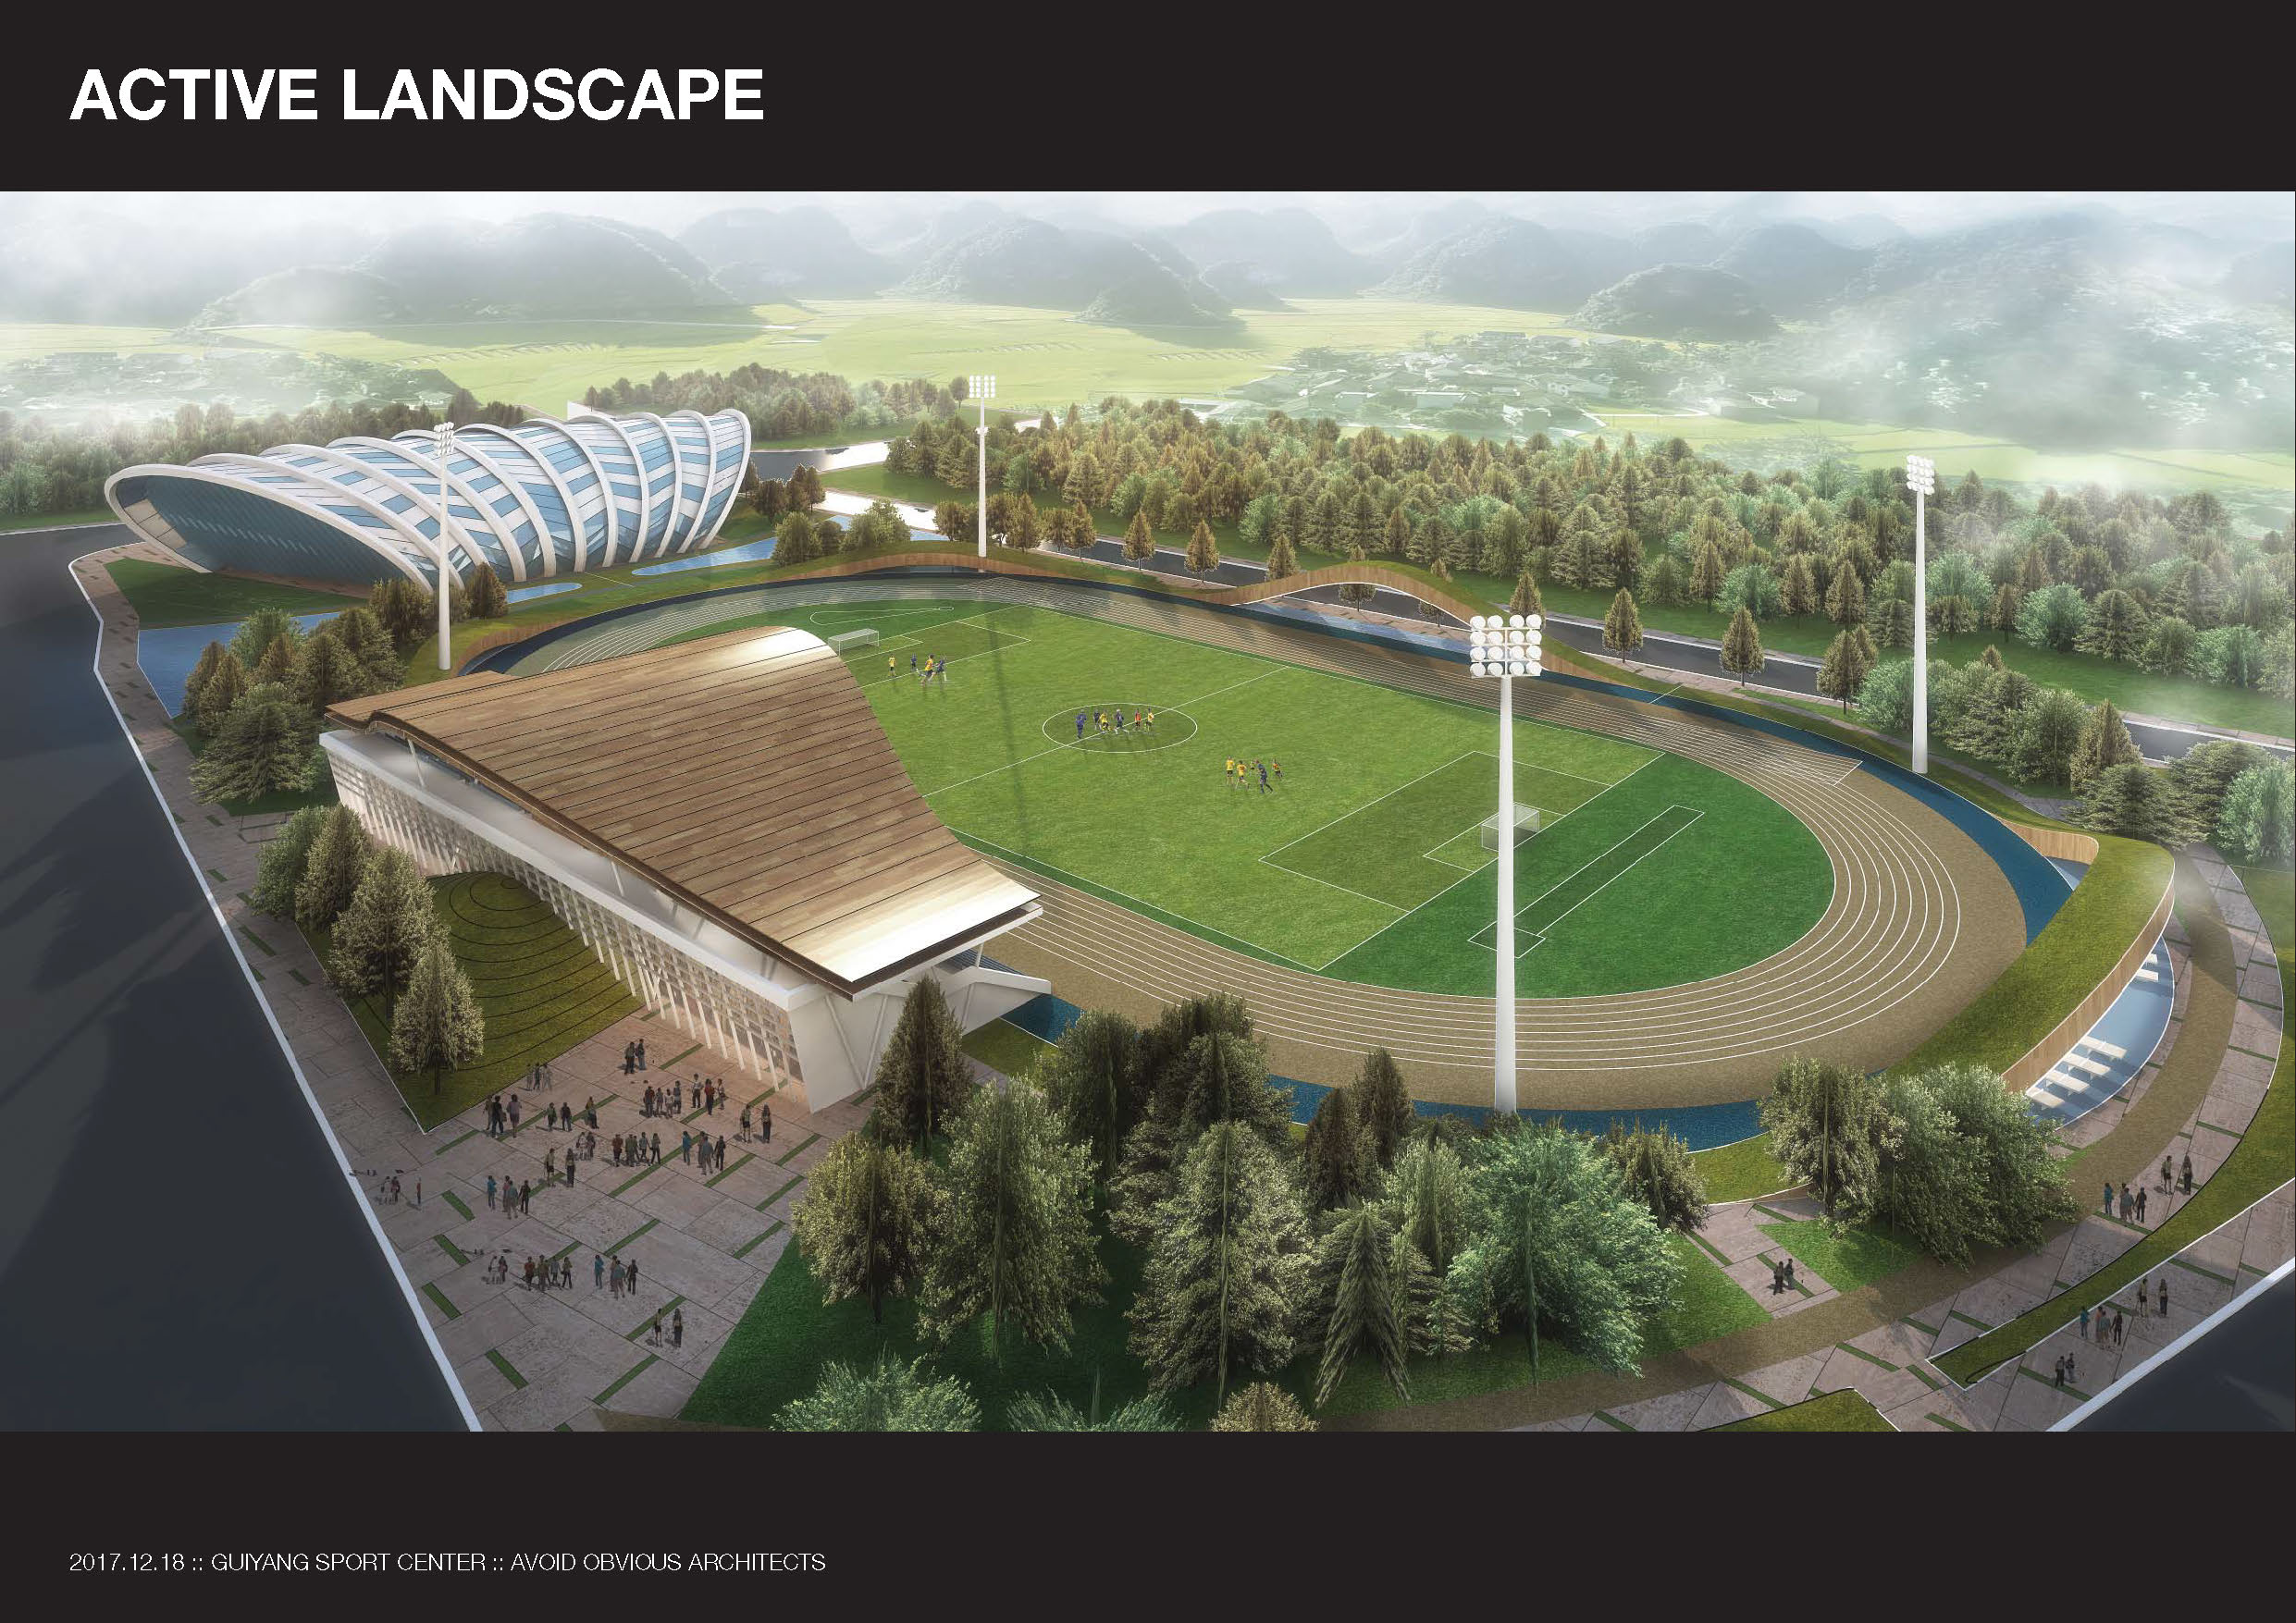 sport center, guiyang, hmong, sustainable, stadium, grand stand, green, landscape. active, avoid obvious, architects, architecture,